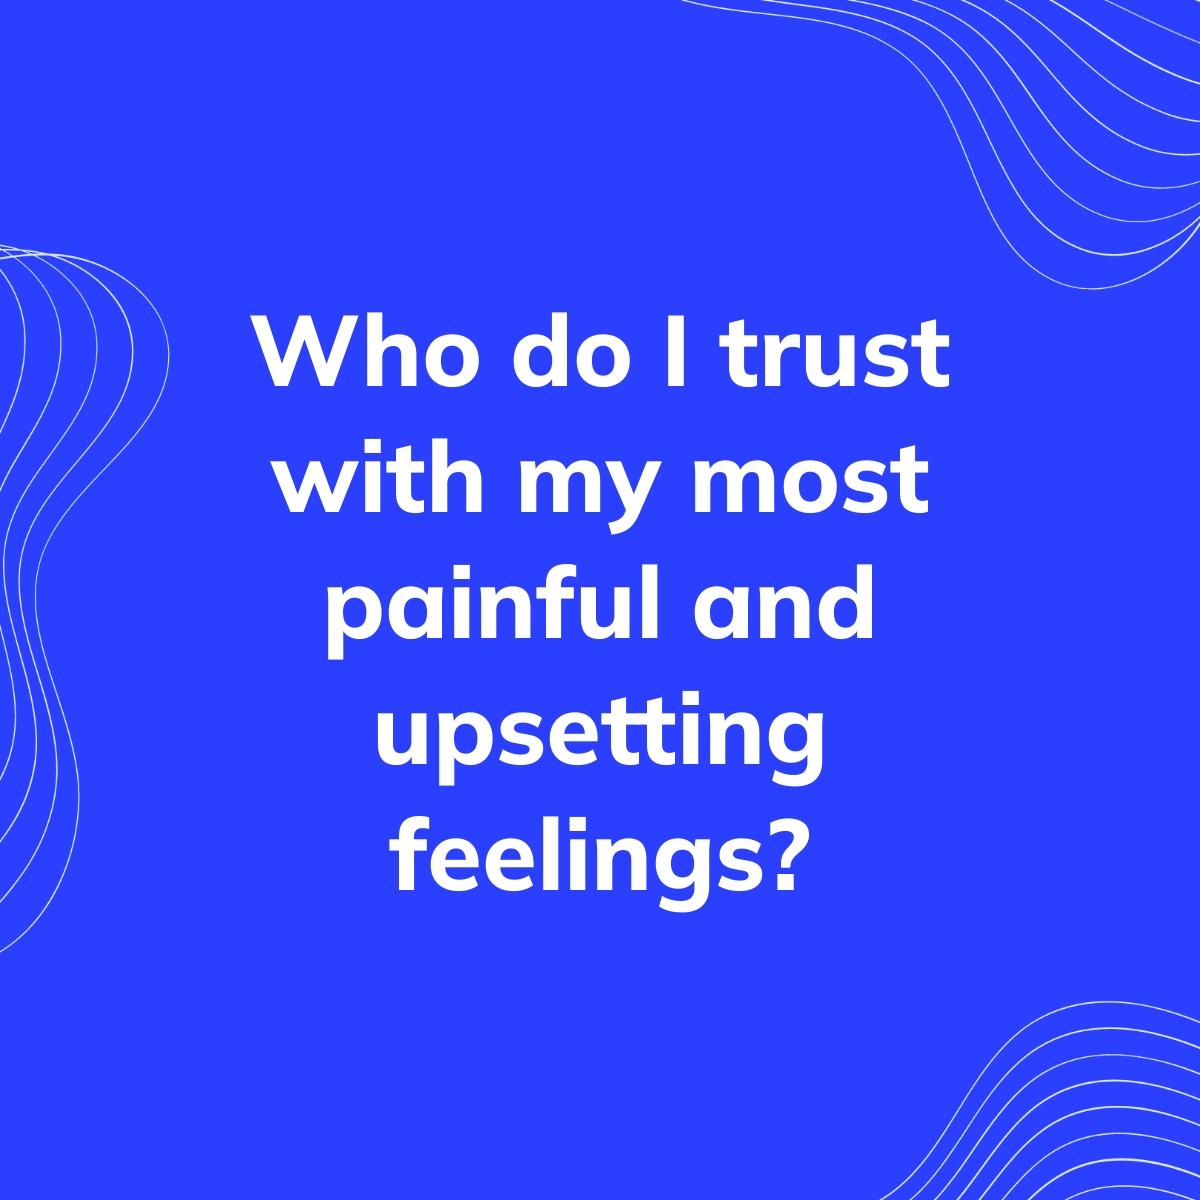 Journal Prompt: Who do I trust with my most painful and upsetting feelings?